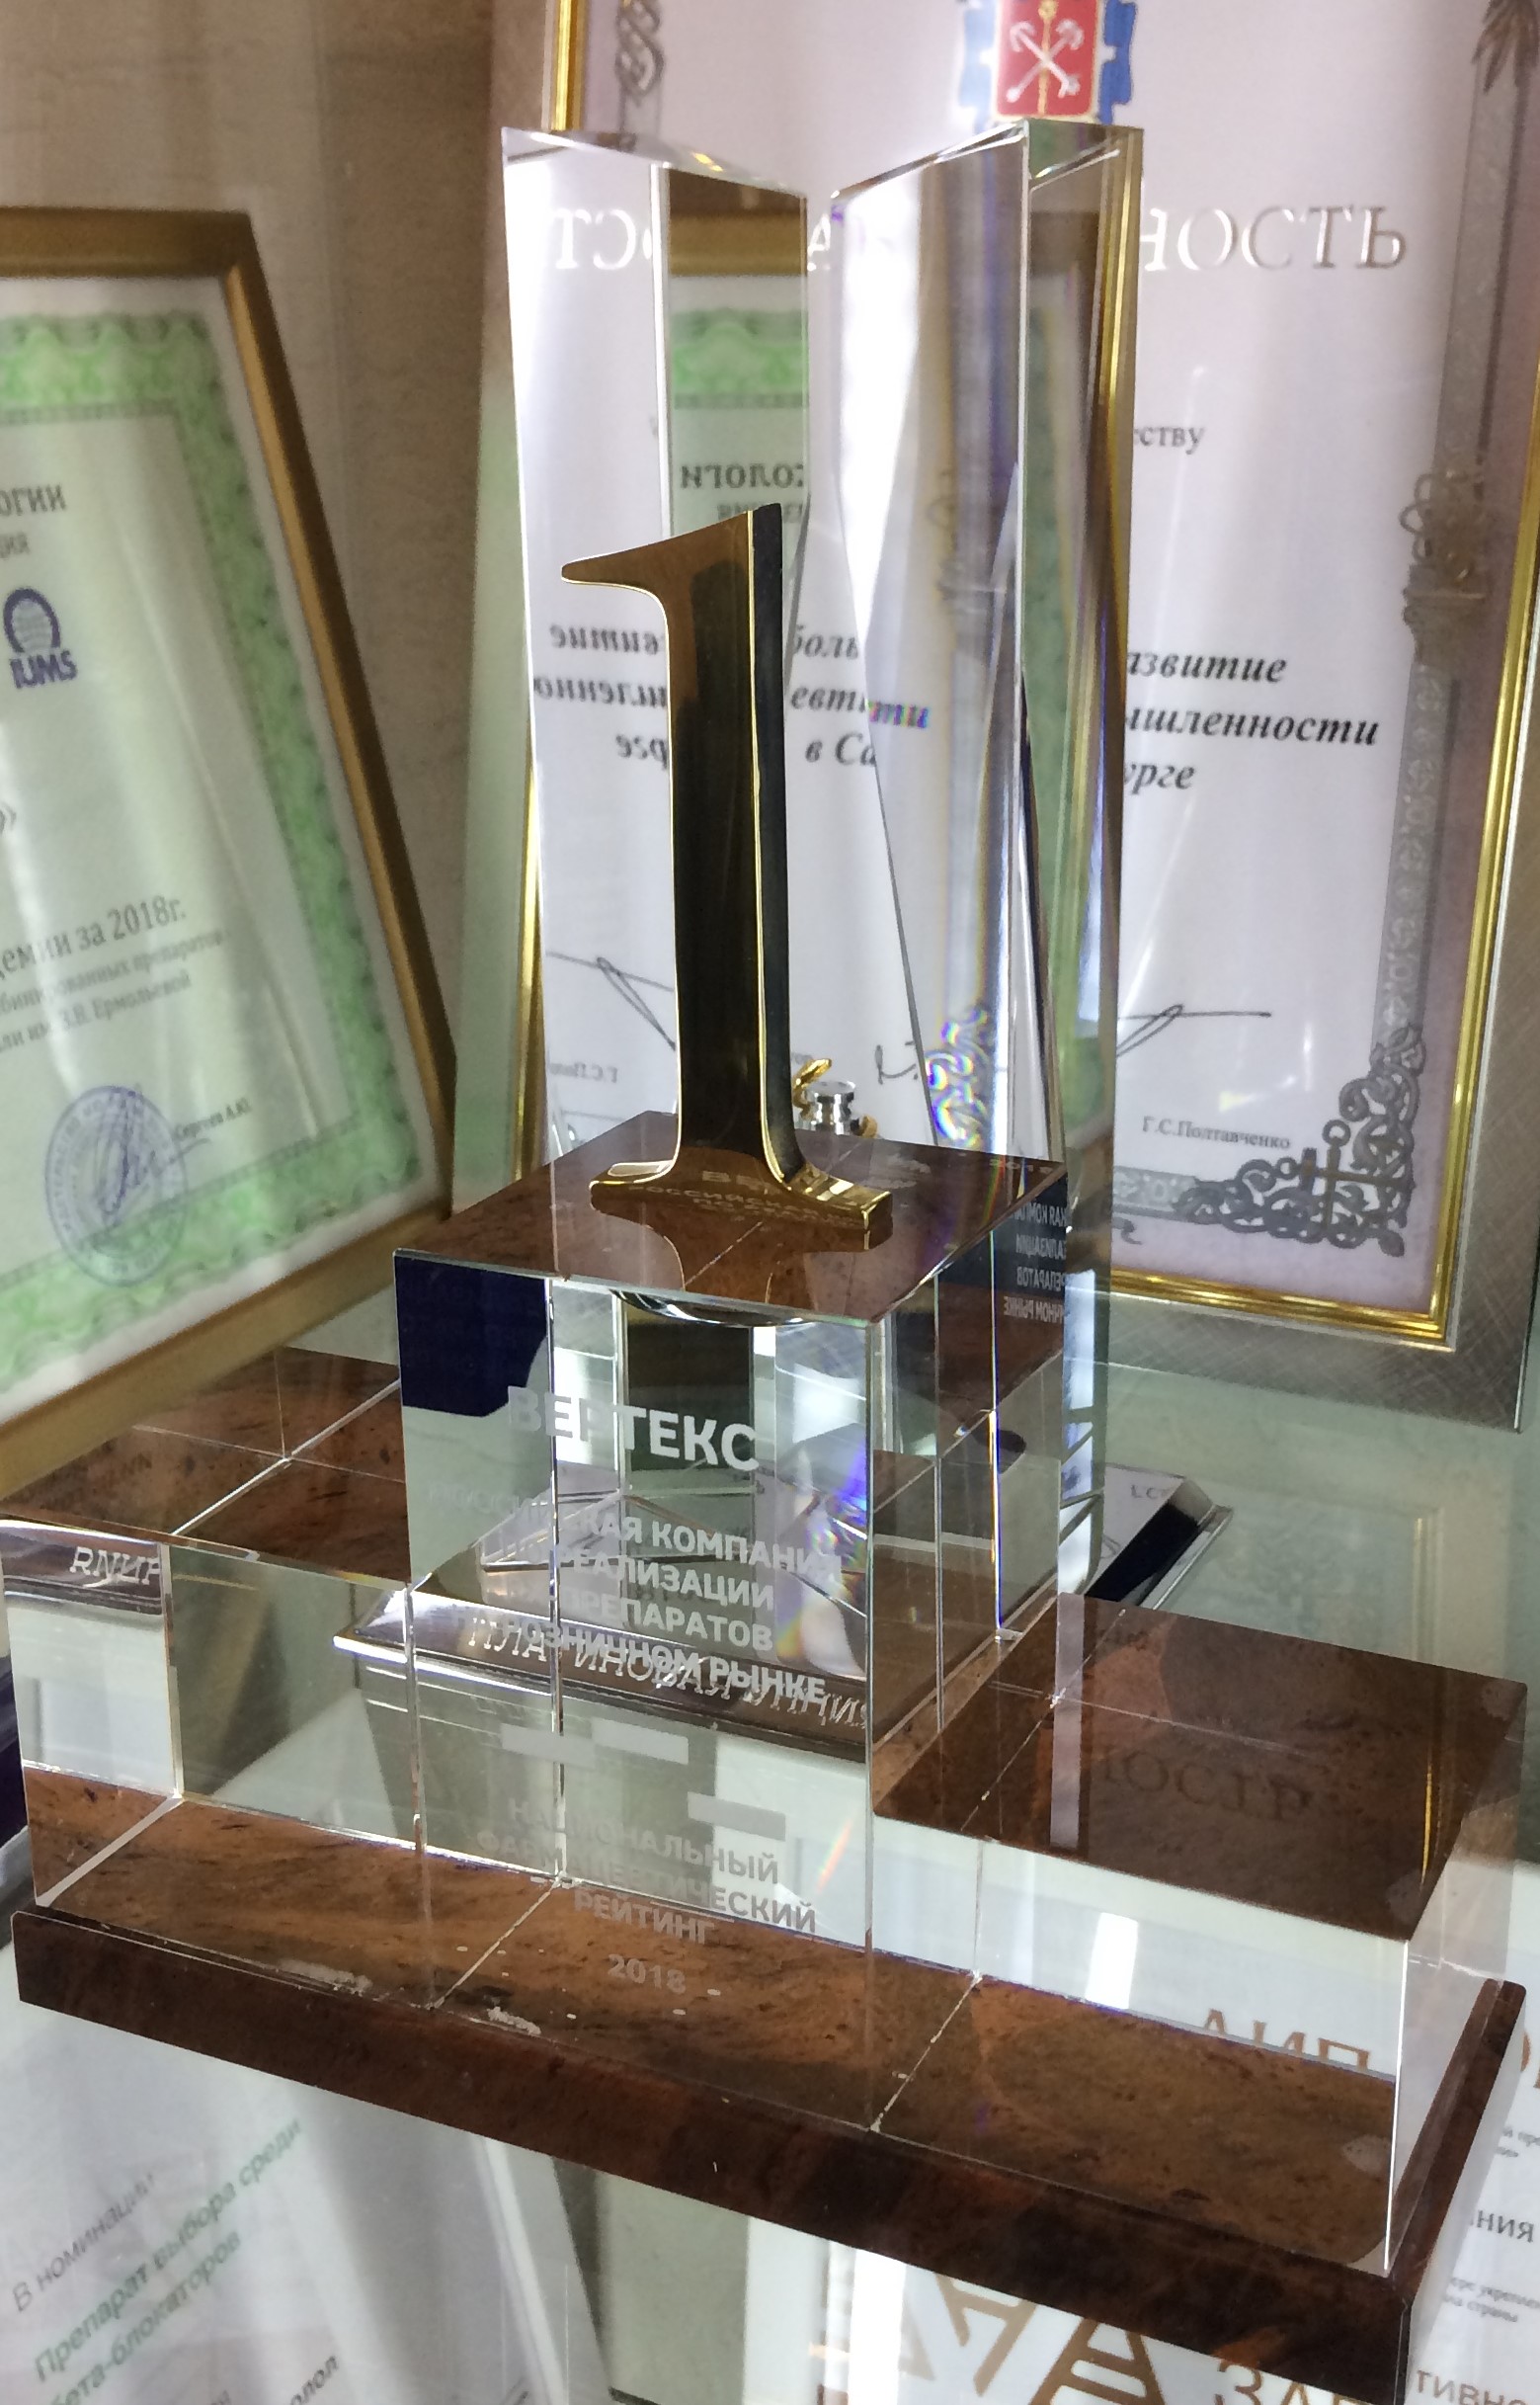 Winner in the nomination "Russian company for the sale of prescription drugs in the retail market", National pharmaceutical rating 2018, October 2017 - September 2018, DSM Group